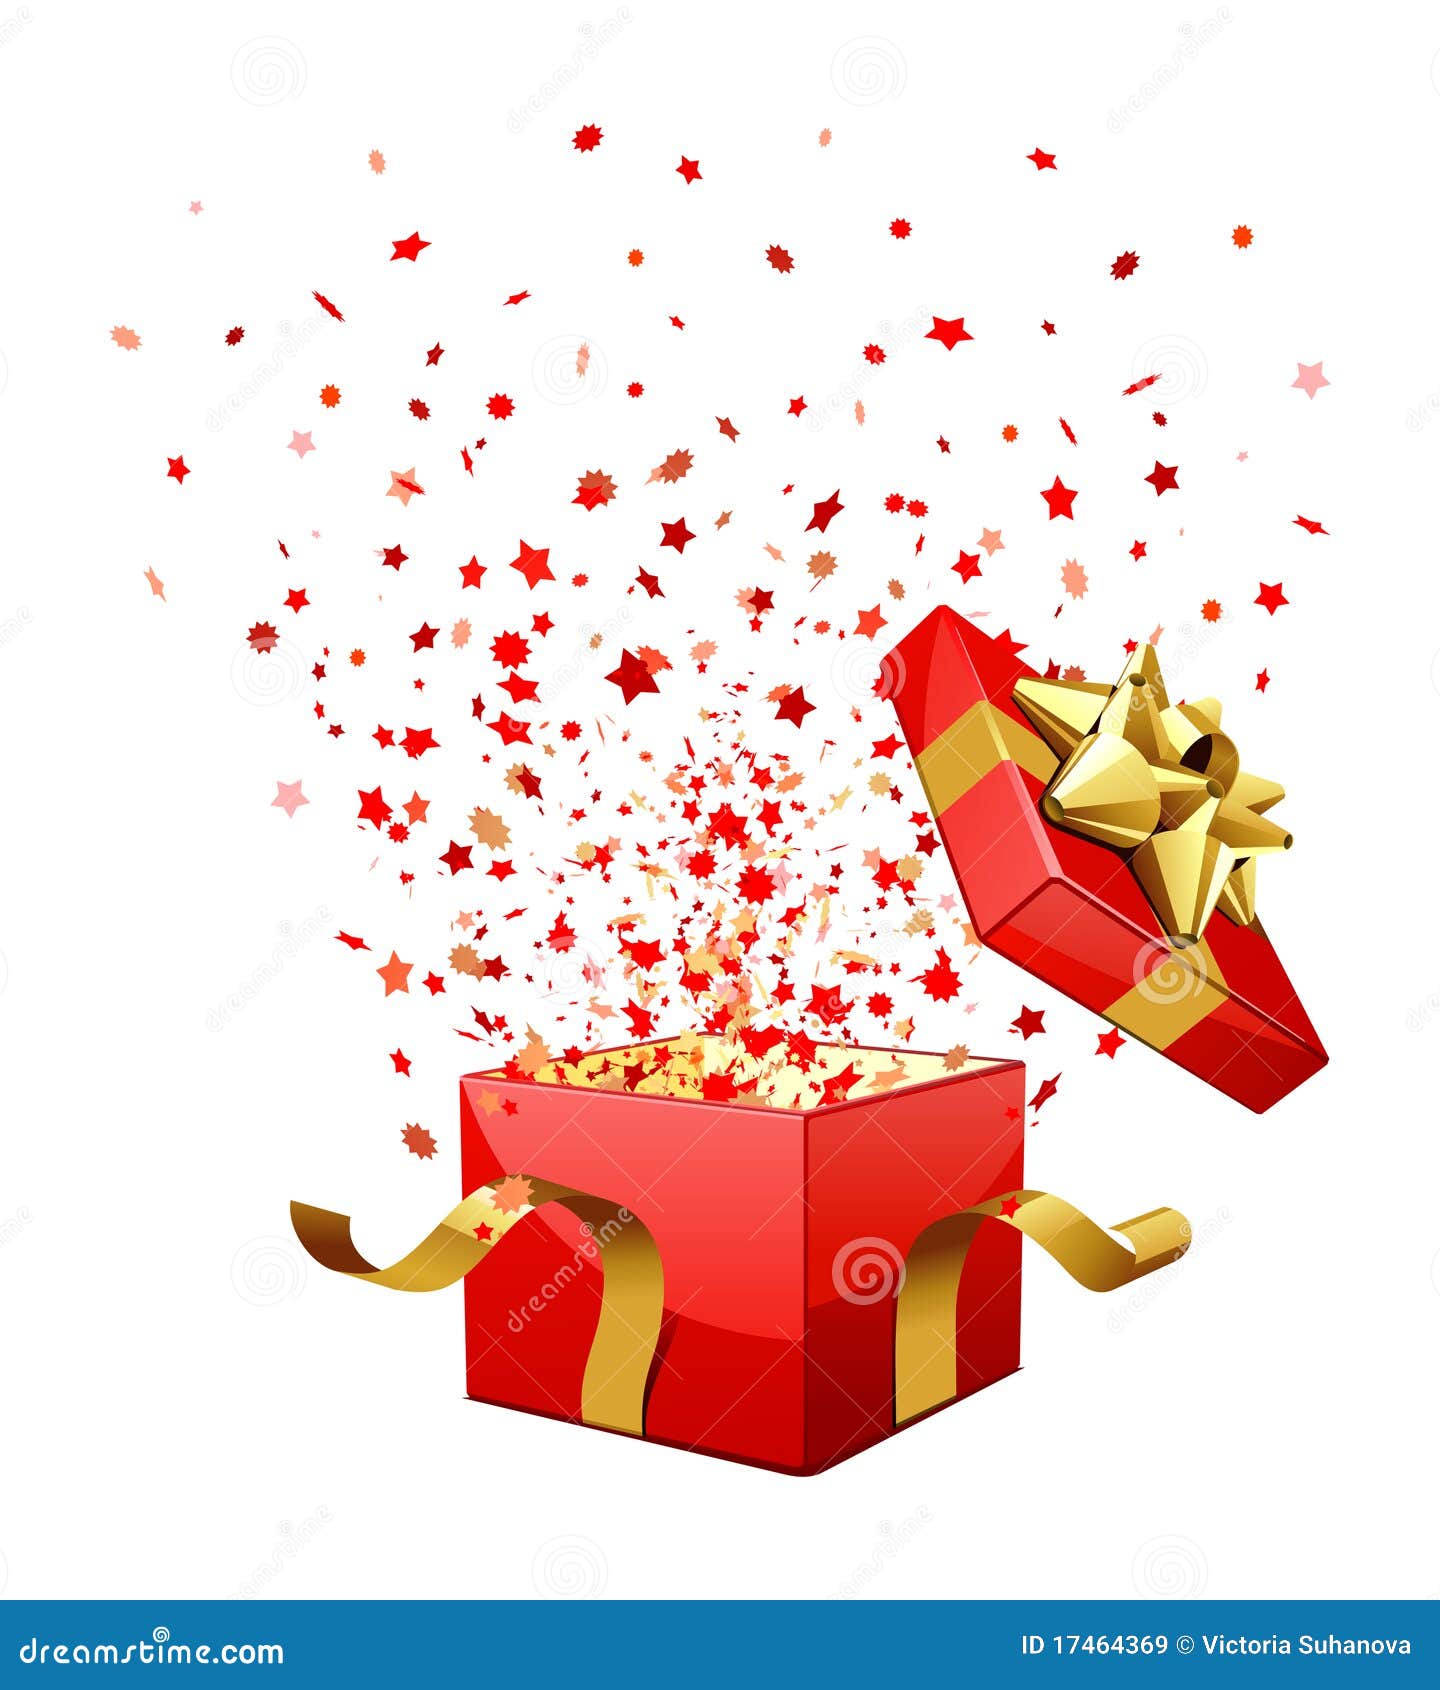 Surprise Gift Box Royalty Free Stock Images Image 17464369